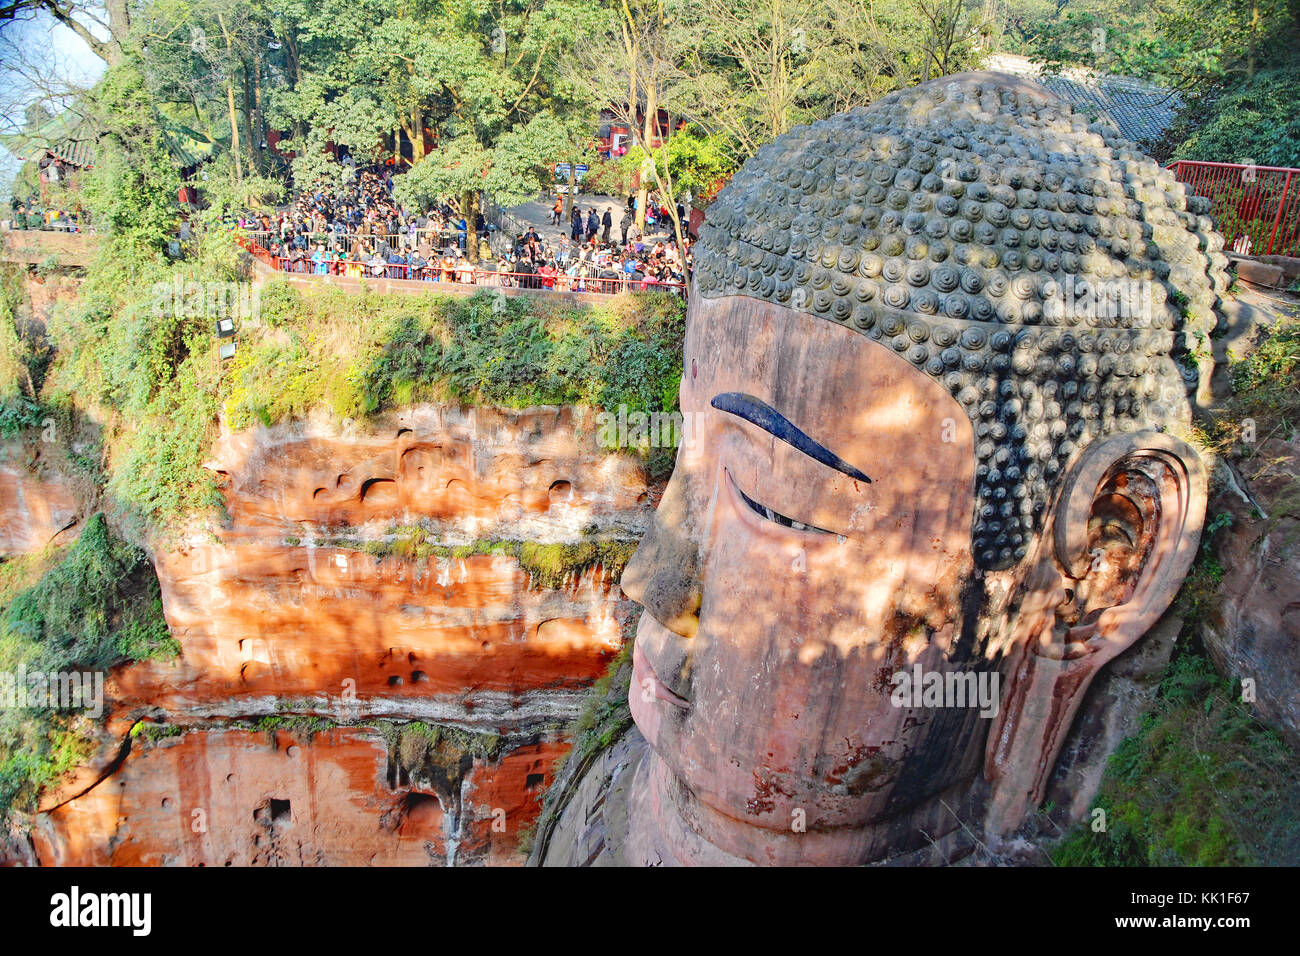 The Giant Buddha of Leshan at the confluence of the Min and Dadu rivers in Leshan, Sichuan province, China. A UNESCO World Heritage Site. Stock Photo